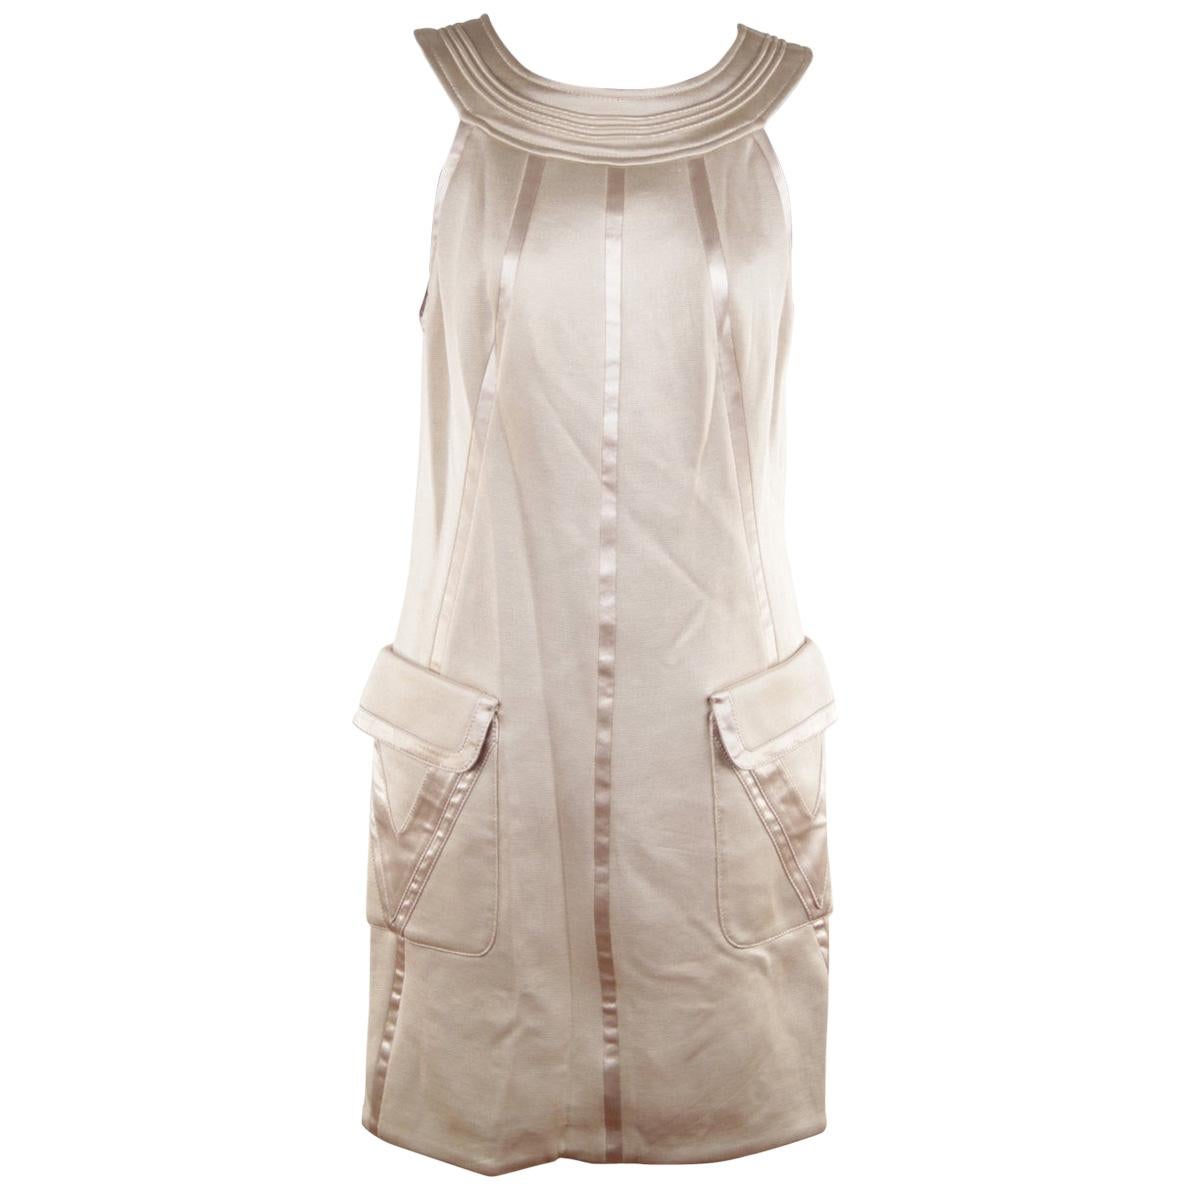 Versace Beige Halter Shift Dress 2006 Fall Collection Size 42 IT